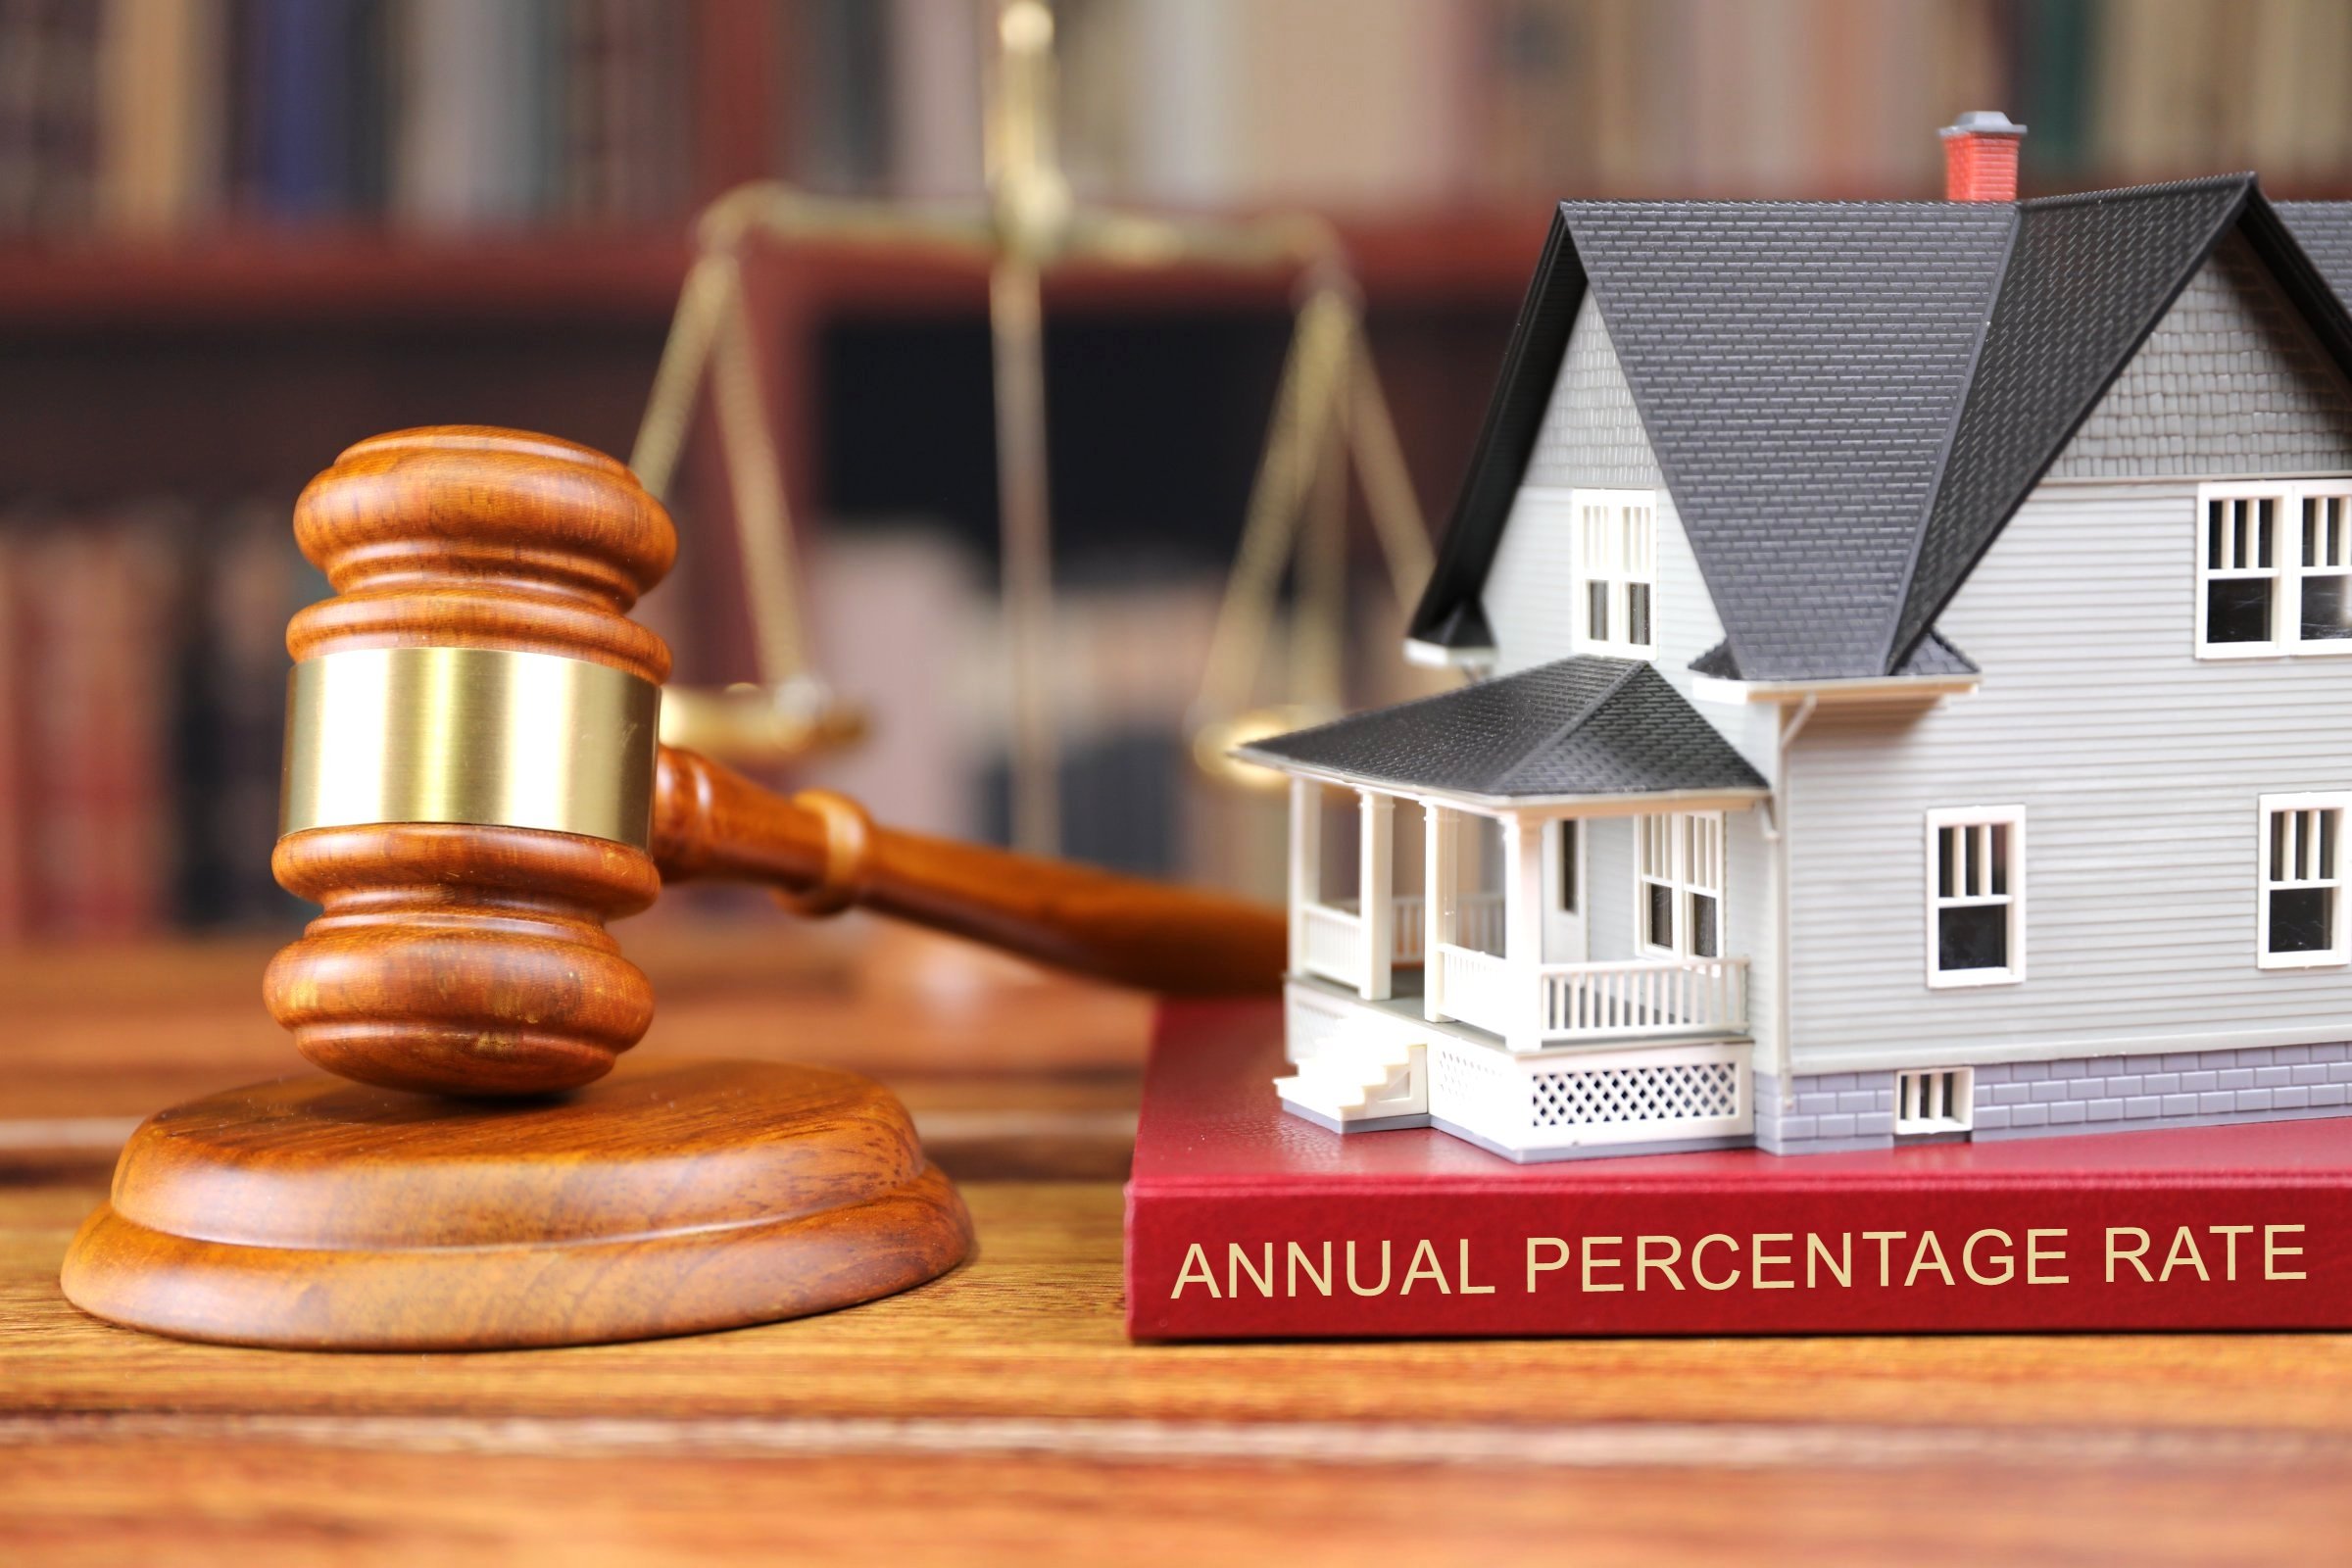 annual percentage rate